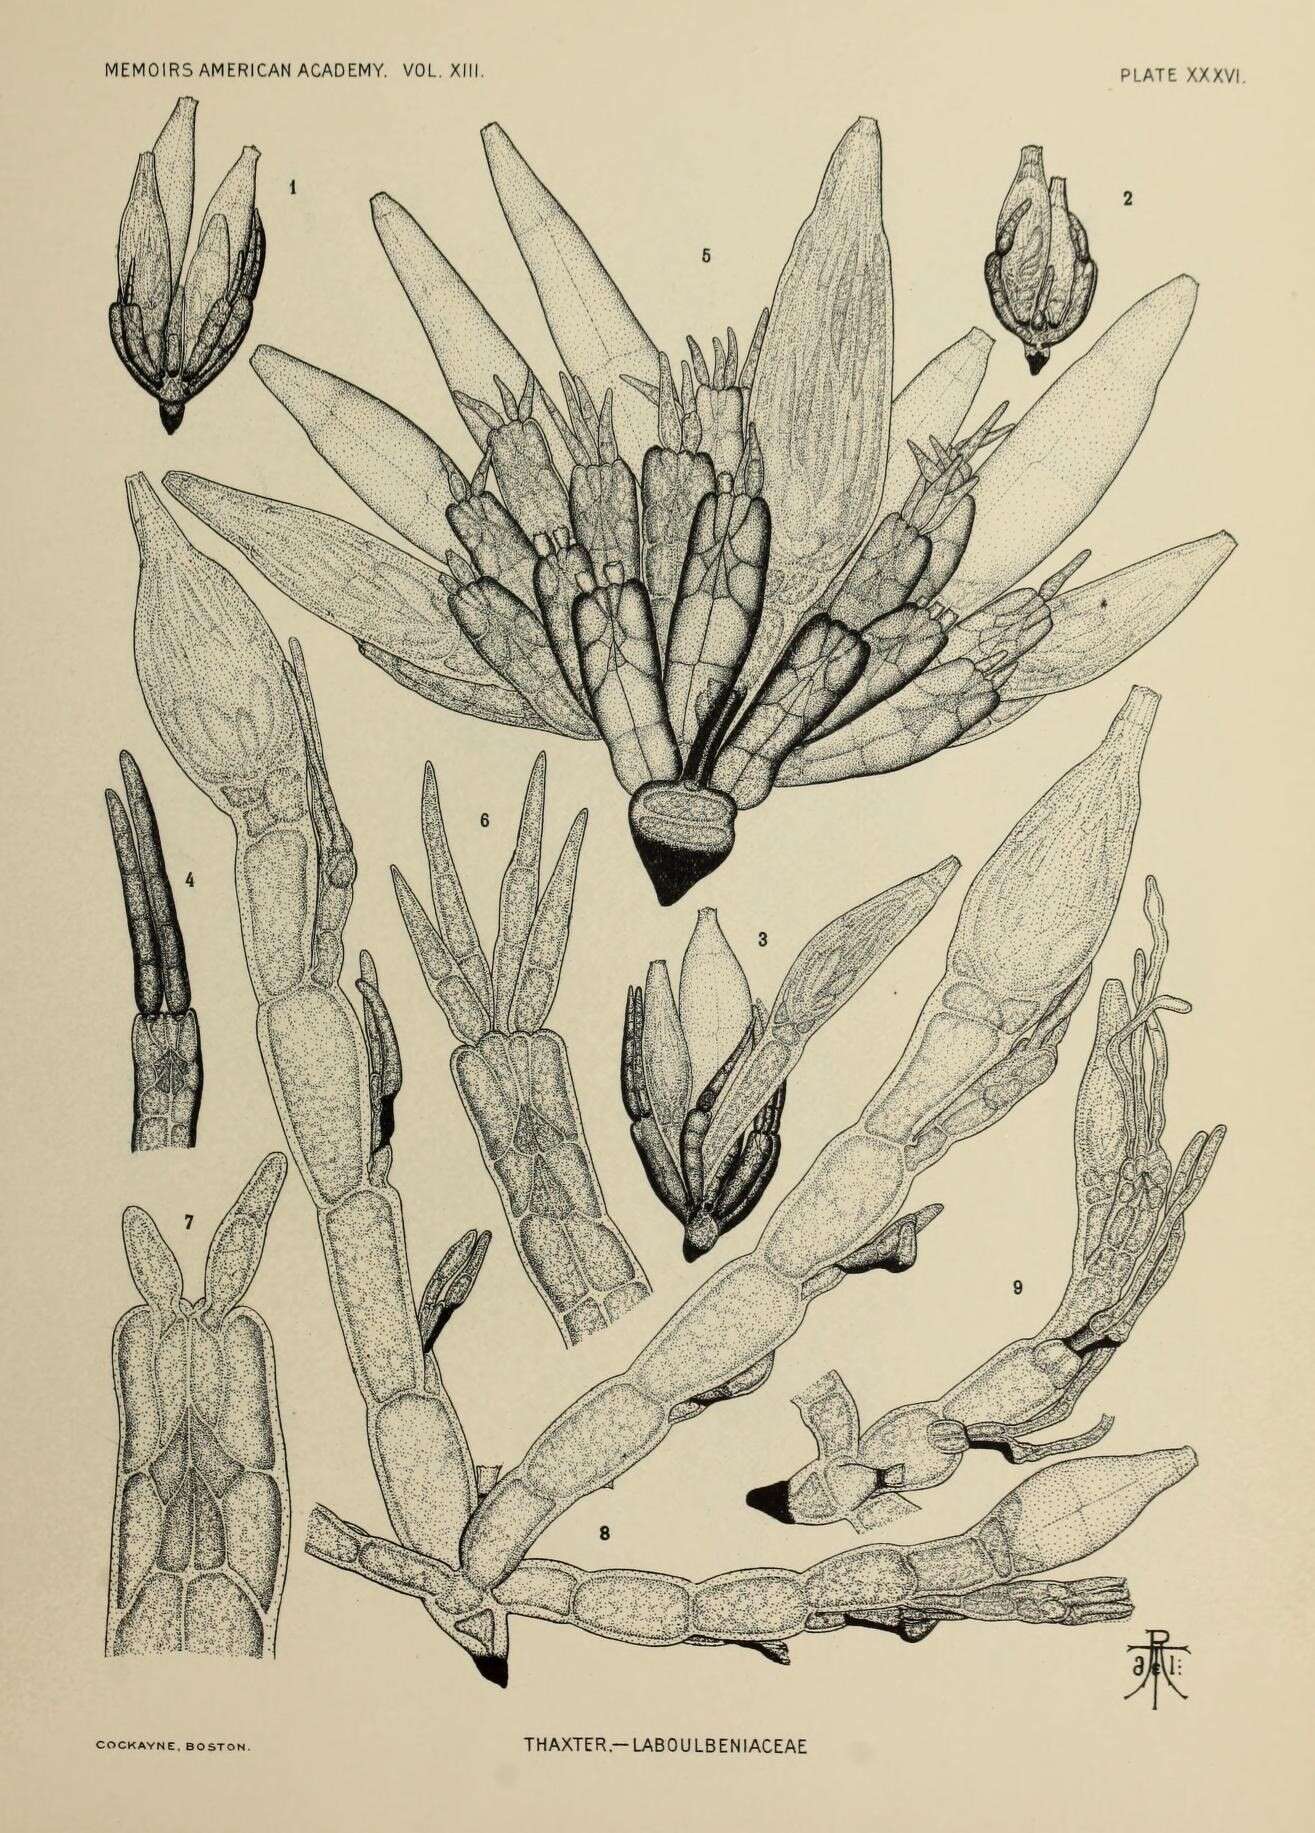 Image of Laboulbeniaceae